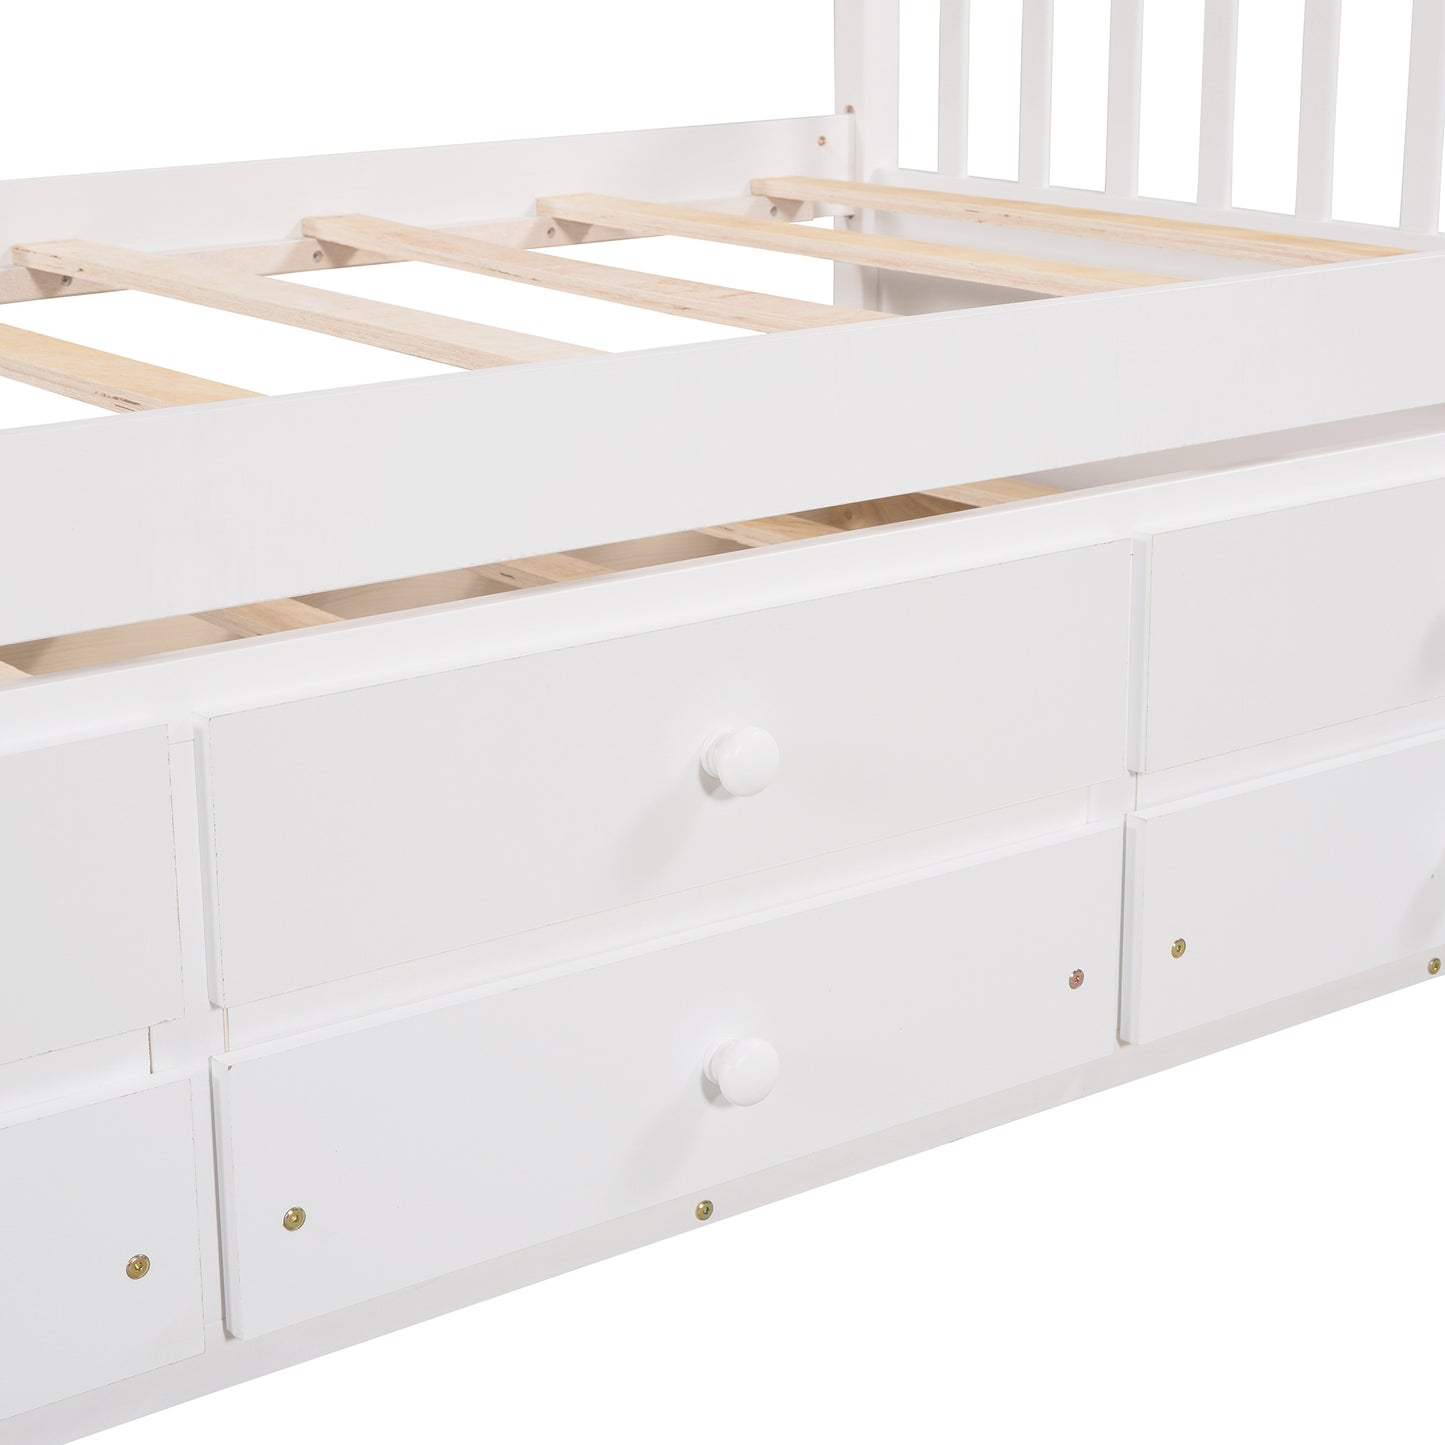 Daybed with Trundle and Drawers, Twin Size, White